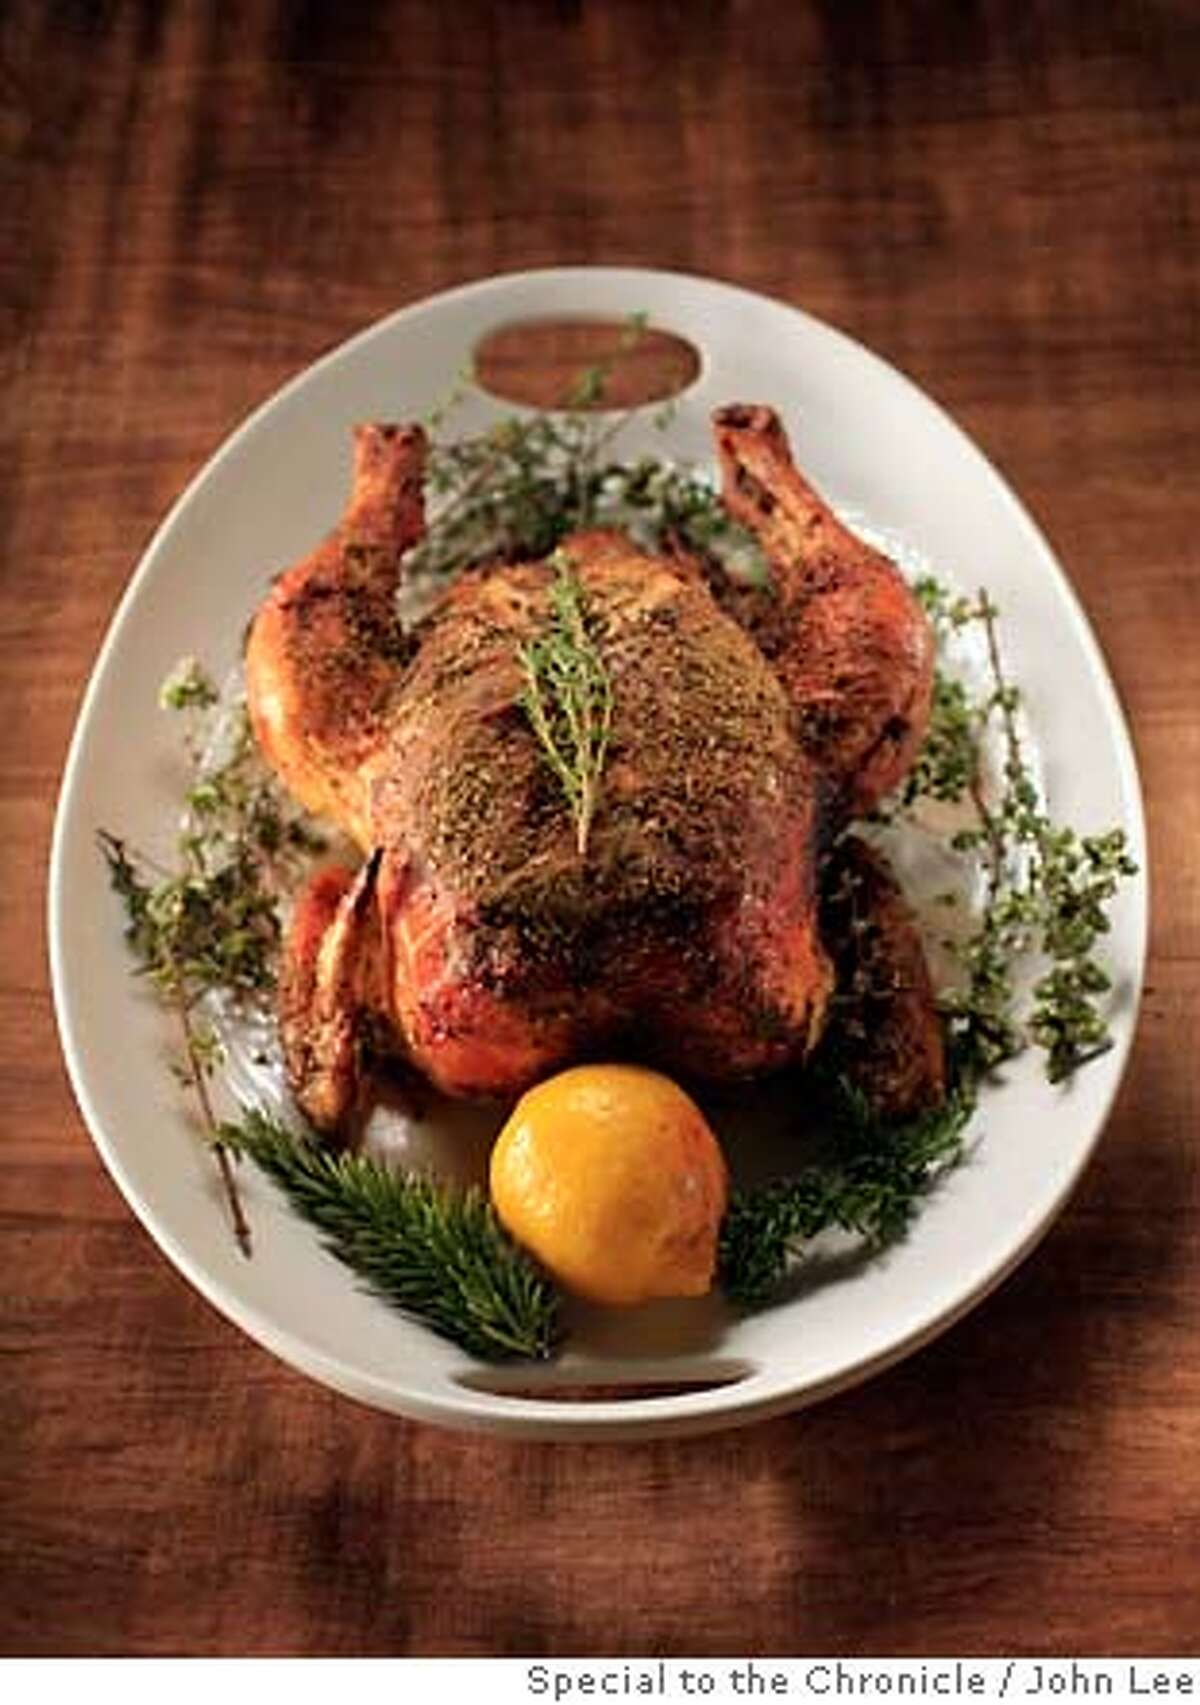 CHICKEN05_01_JOHNLEE.JPG For Chicken and Egg issue. Traci des Jardin's roast chicken. By JOHN LEE/SPECIAL TO THE CHRONICLE